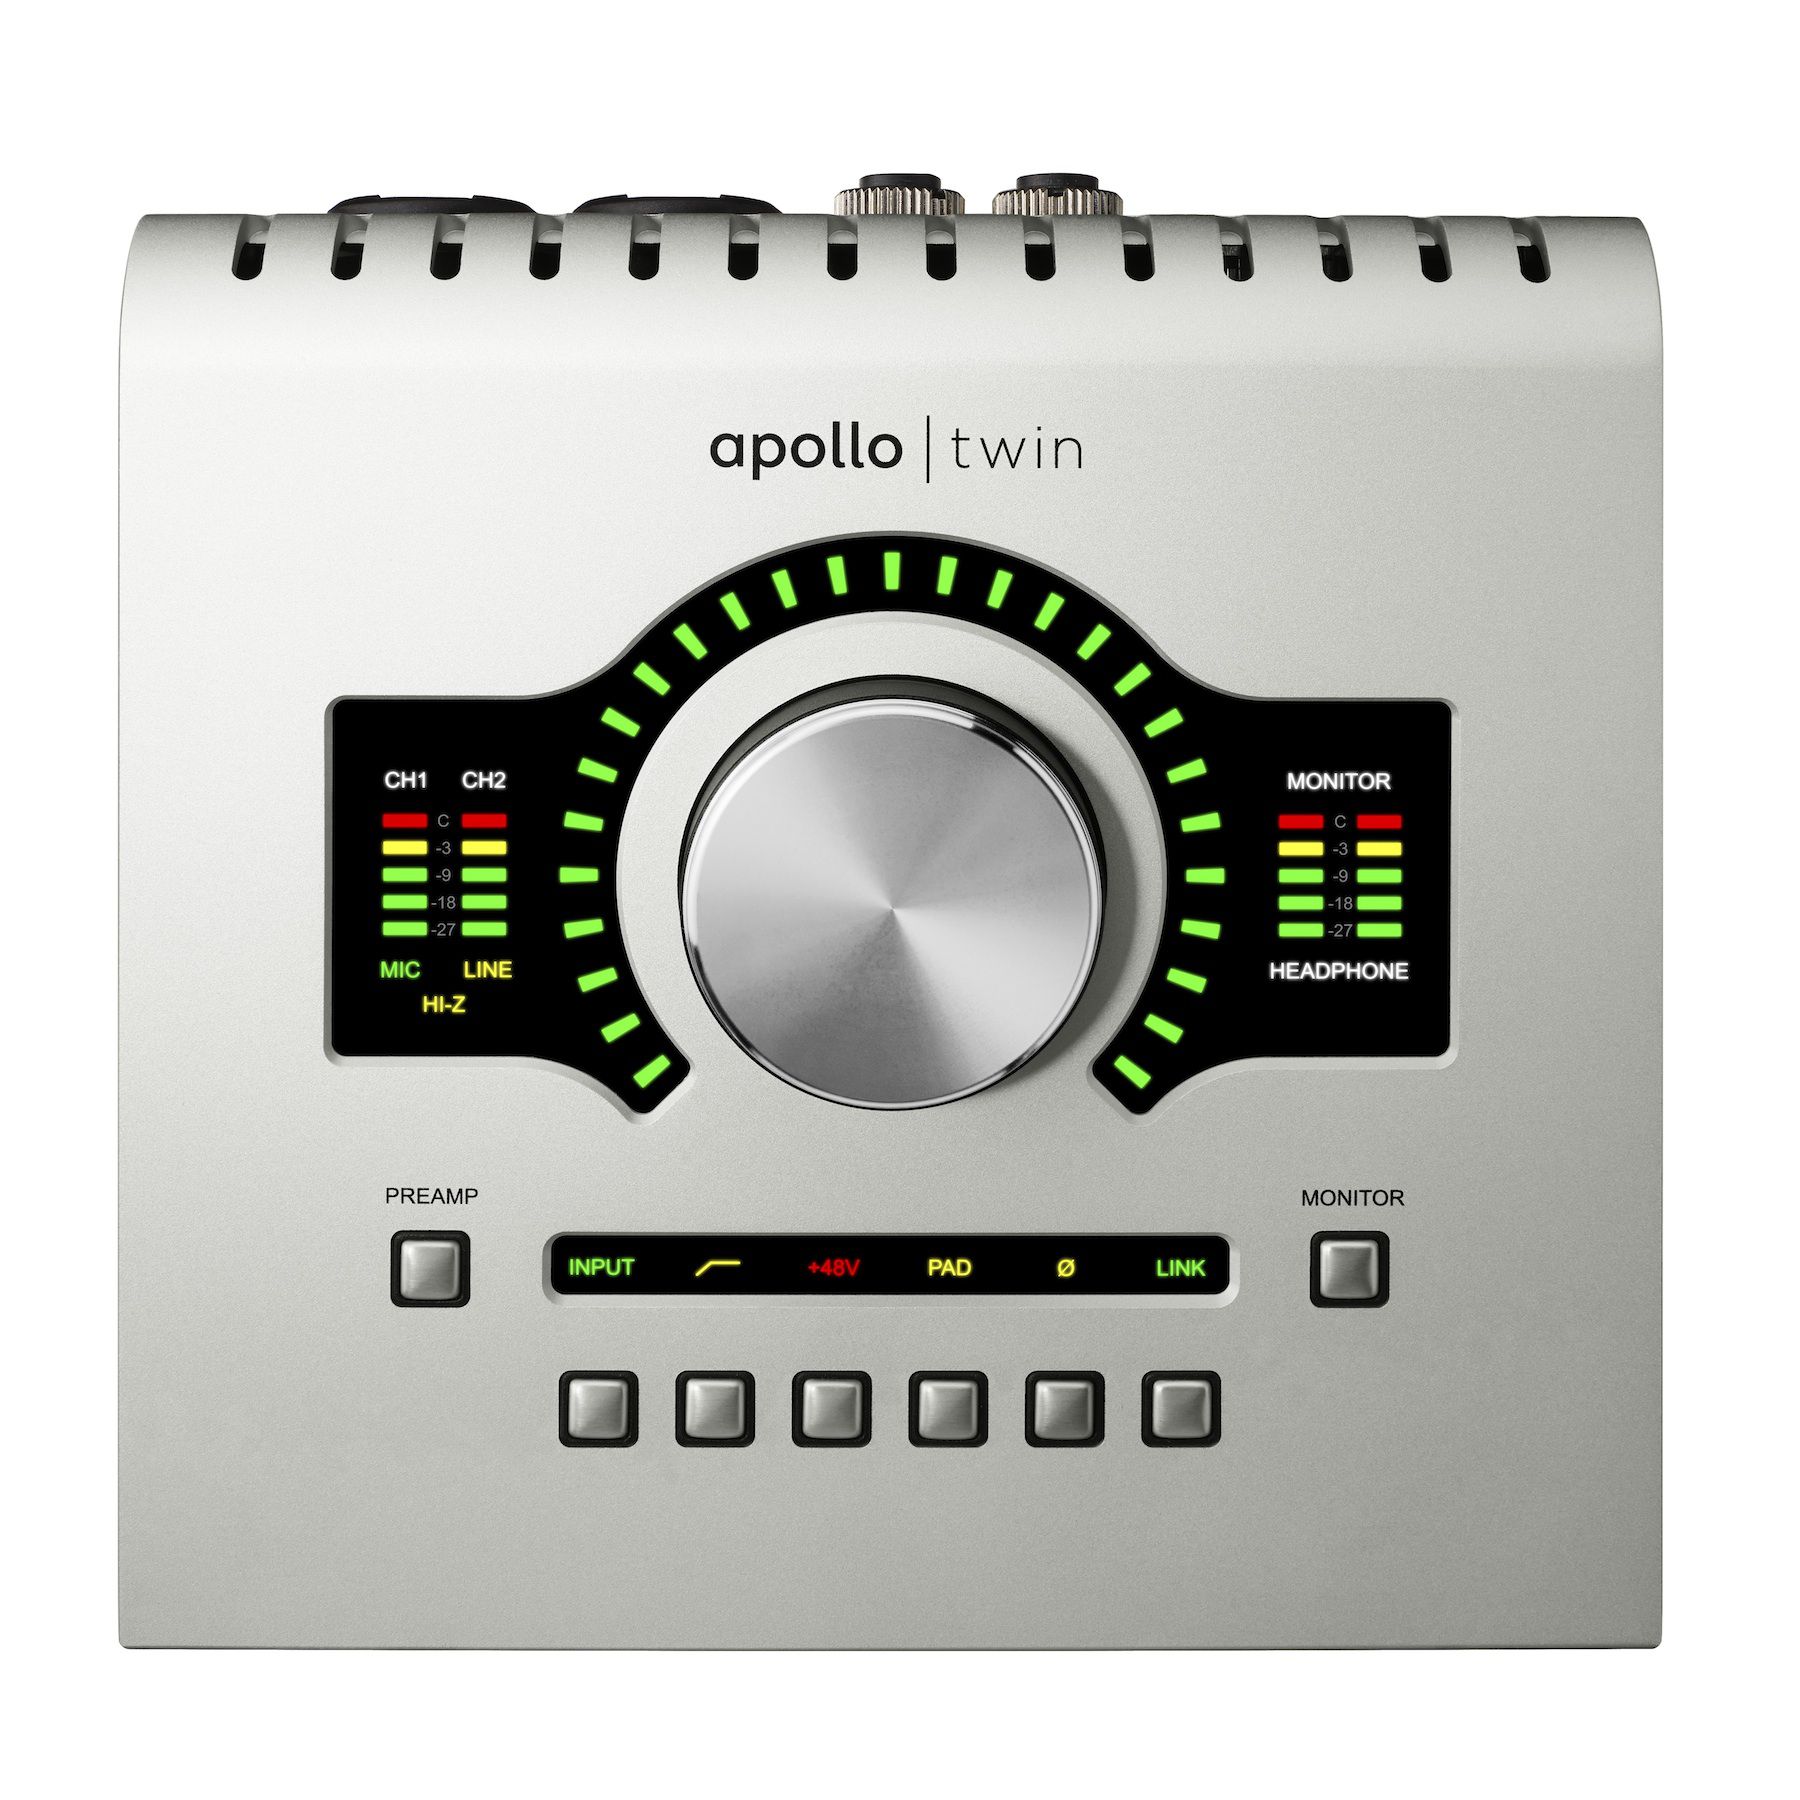 UAD Apollo Twin - The Unison technology on the Apollo Twin works as advertised - the sonic versatility of these preamps is just amazing.